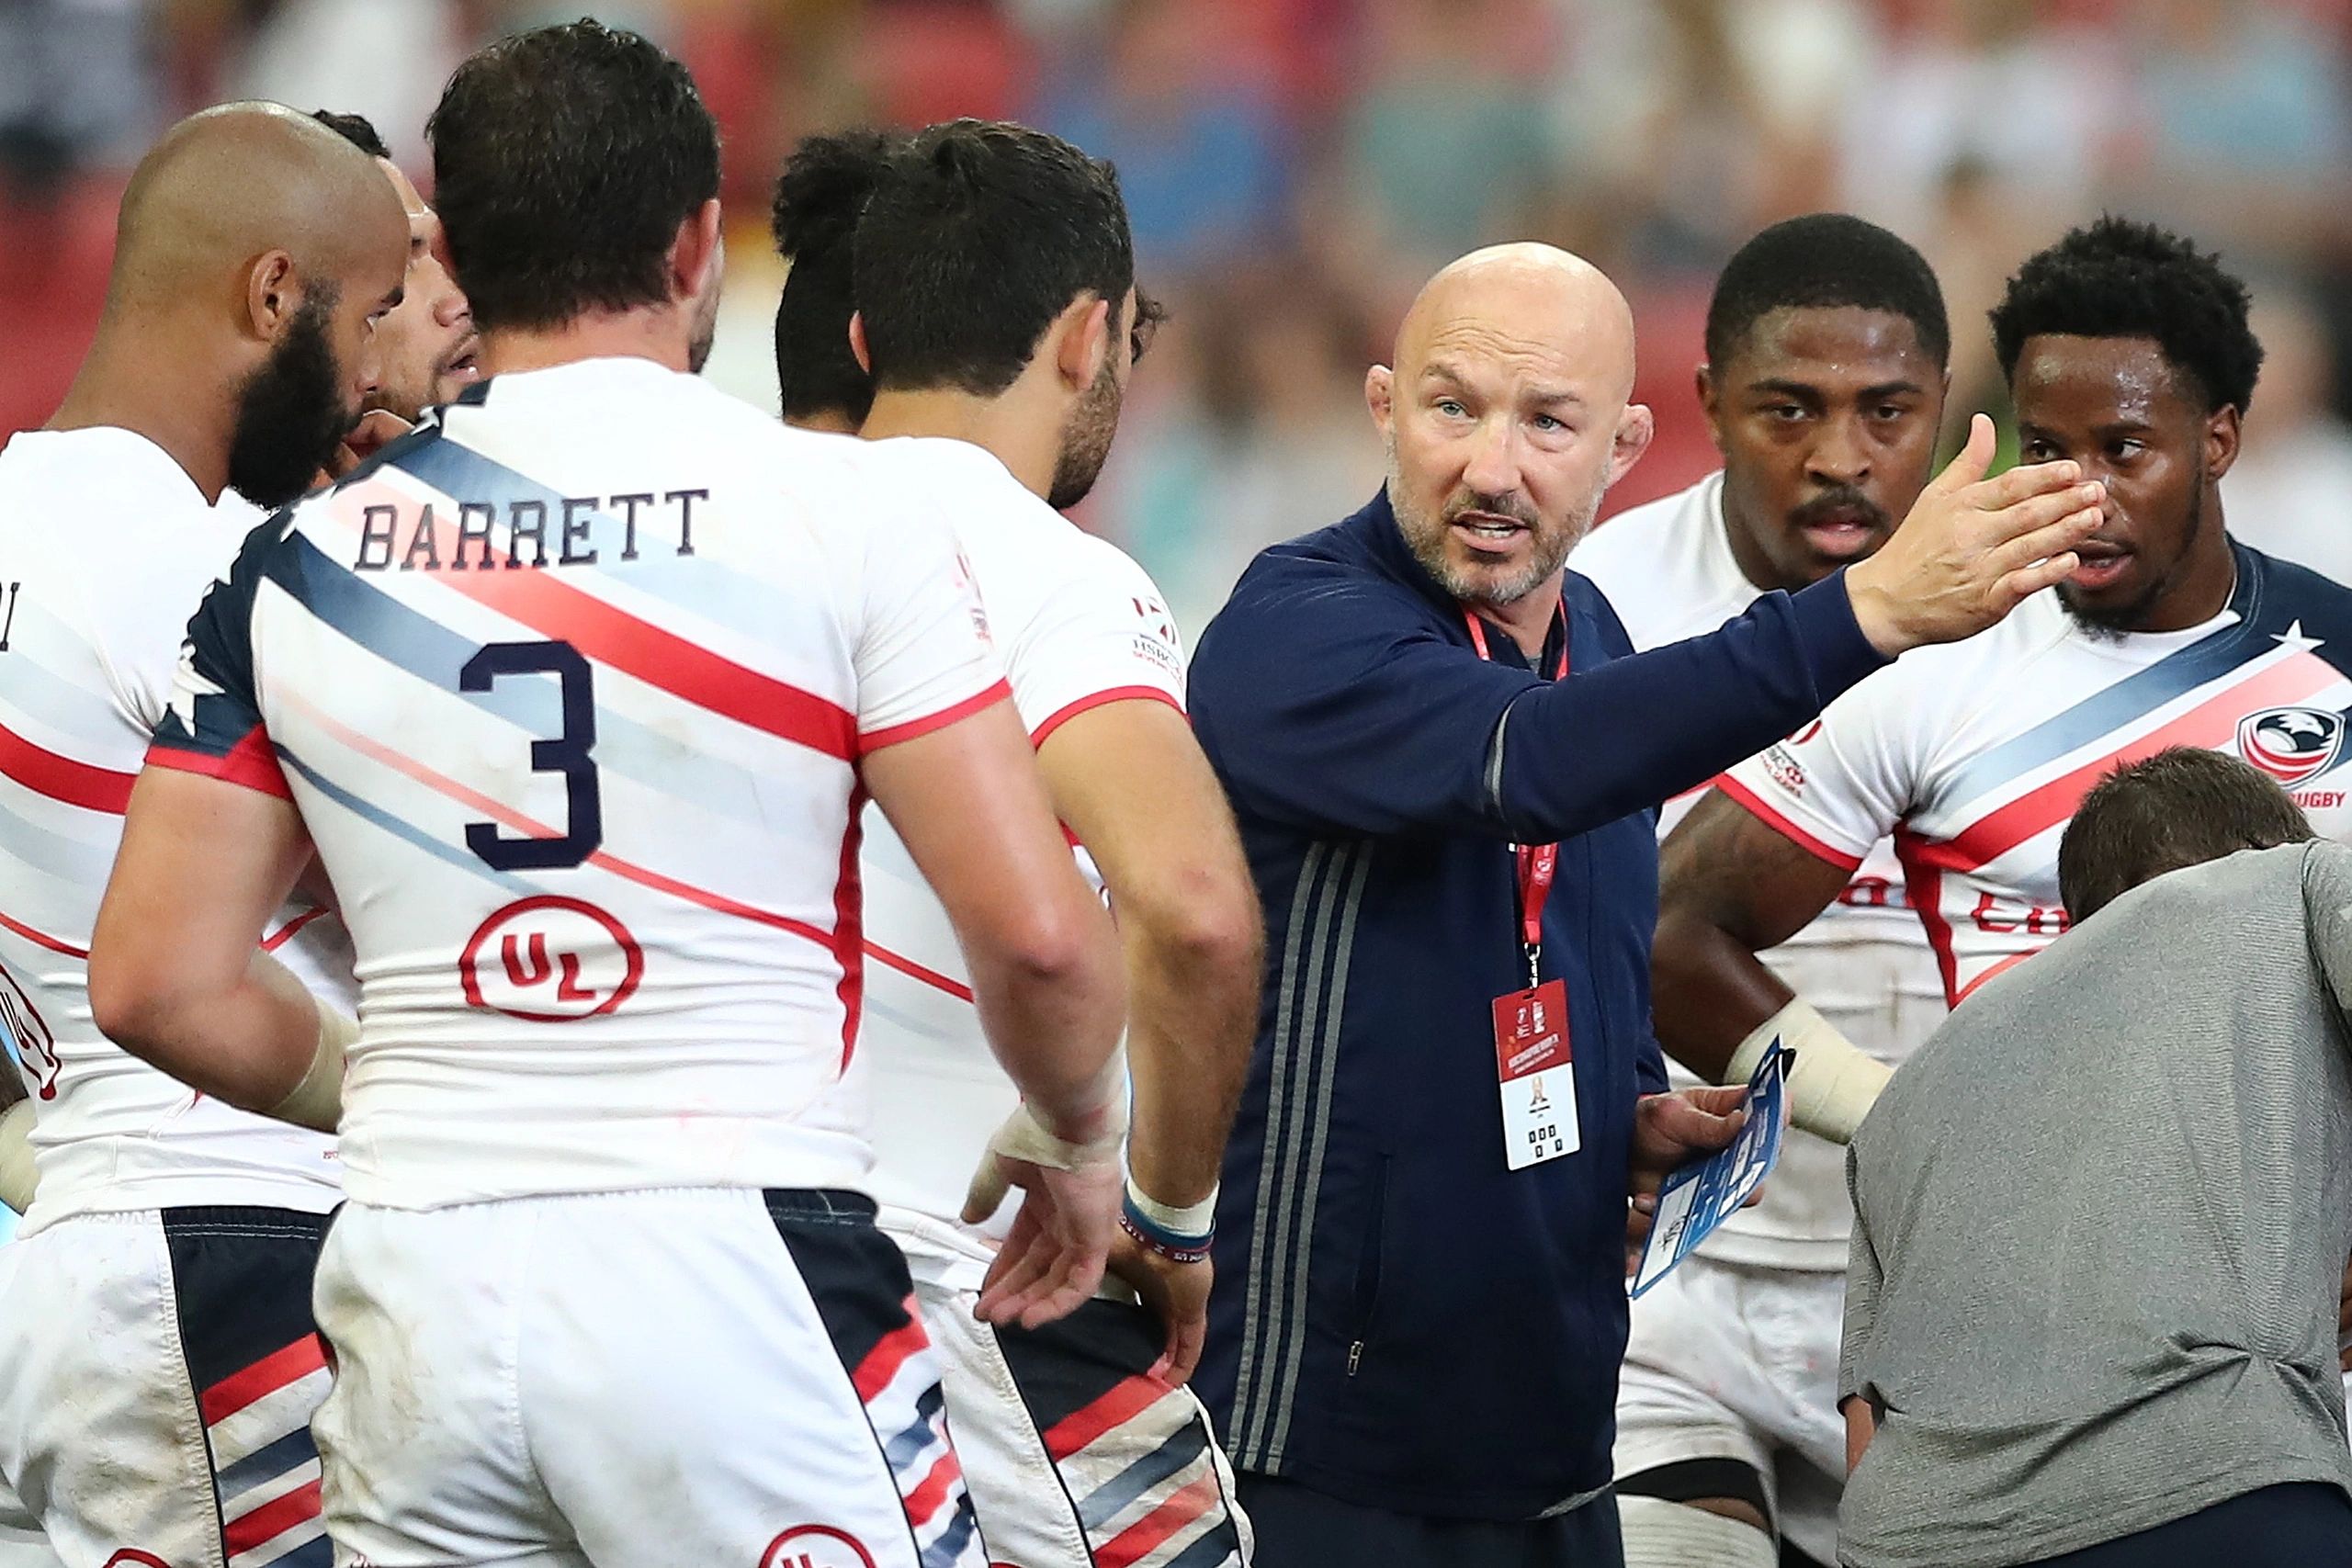 Phil greening coaching  USA 7s rugby

